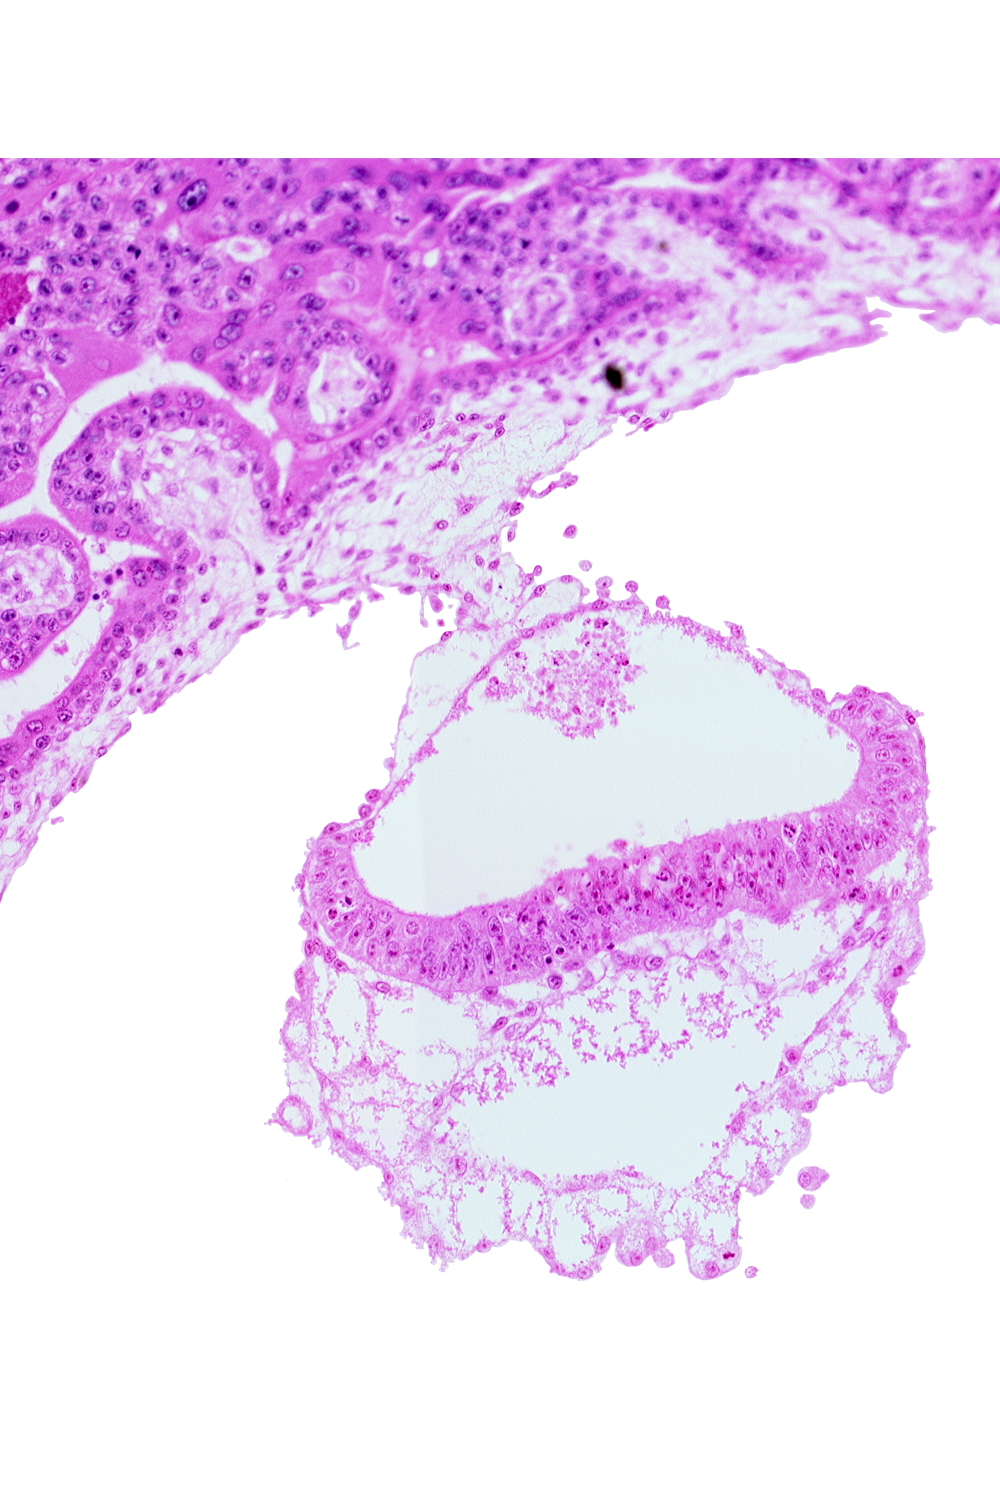 connecting stalk, extra-embryonic coelom, junction of amnion and epiblast plate, primordial blood vessel(s), two-layered amnion, umbilical vesicle wall